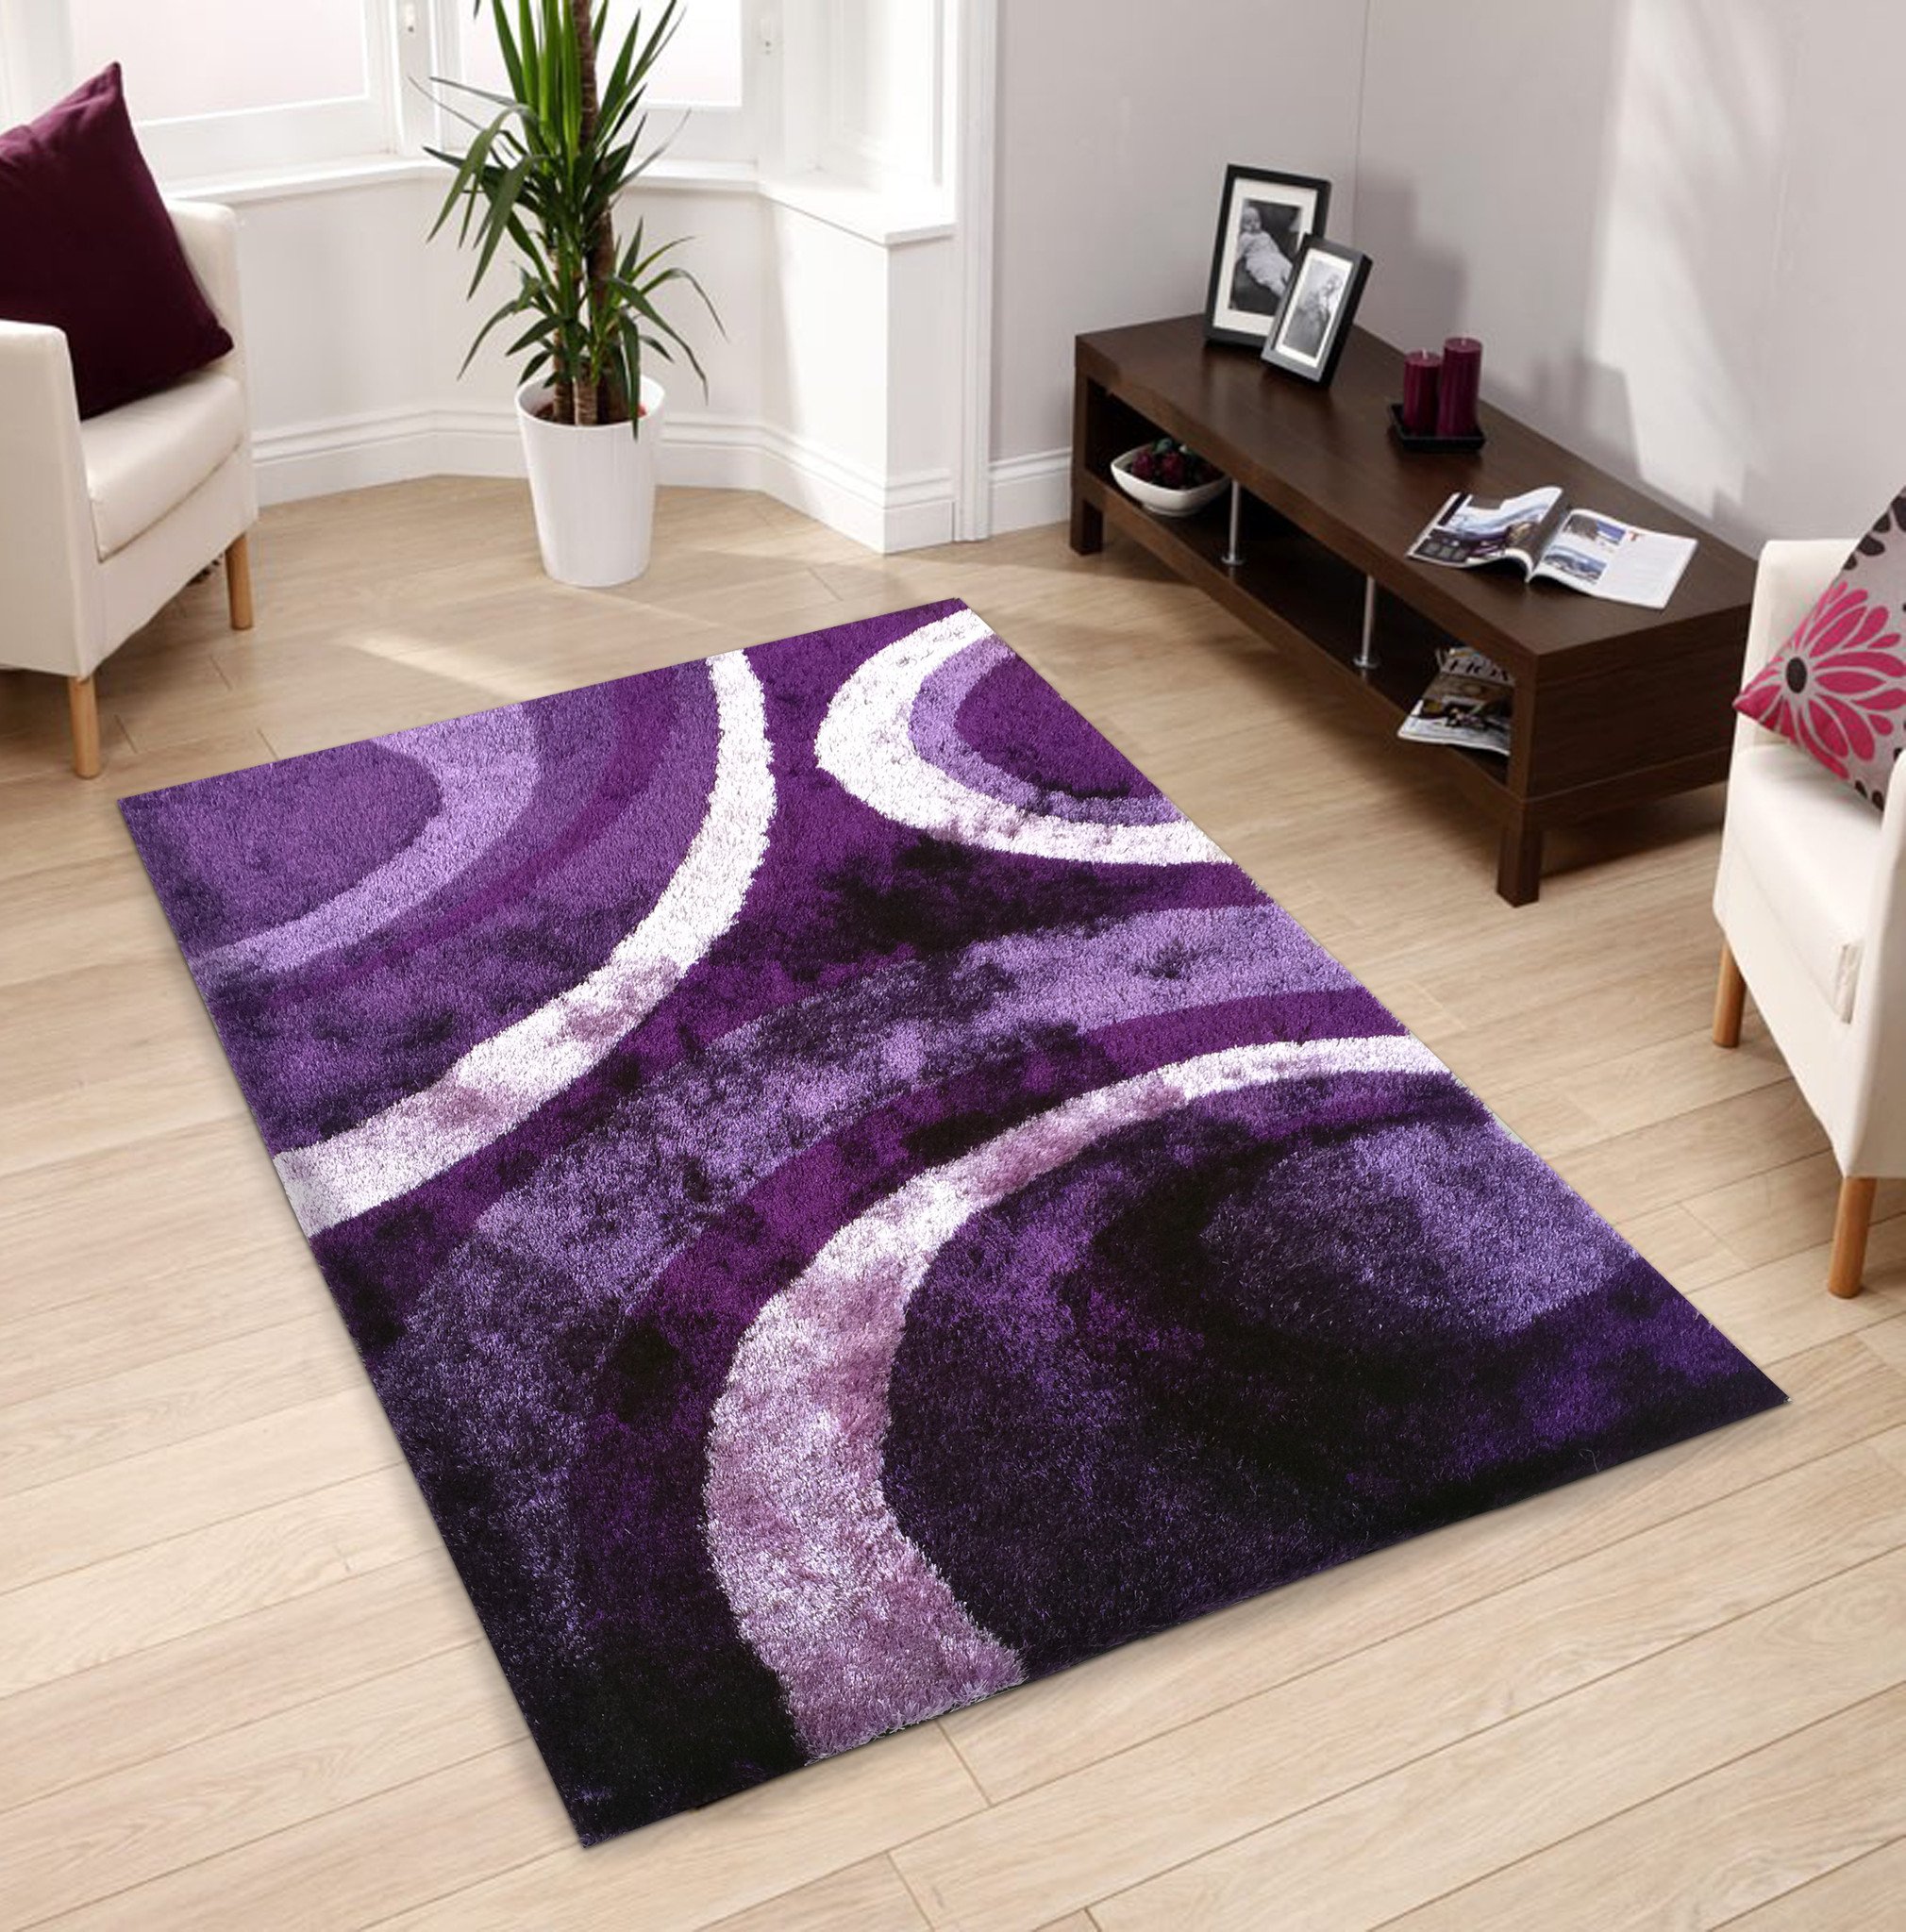 How to find cheap purple rugs?